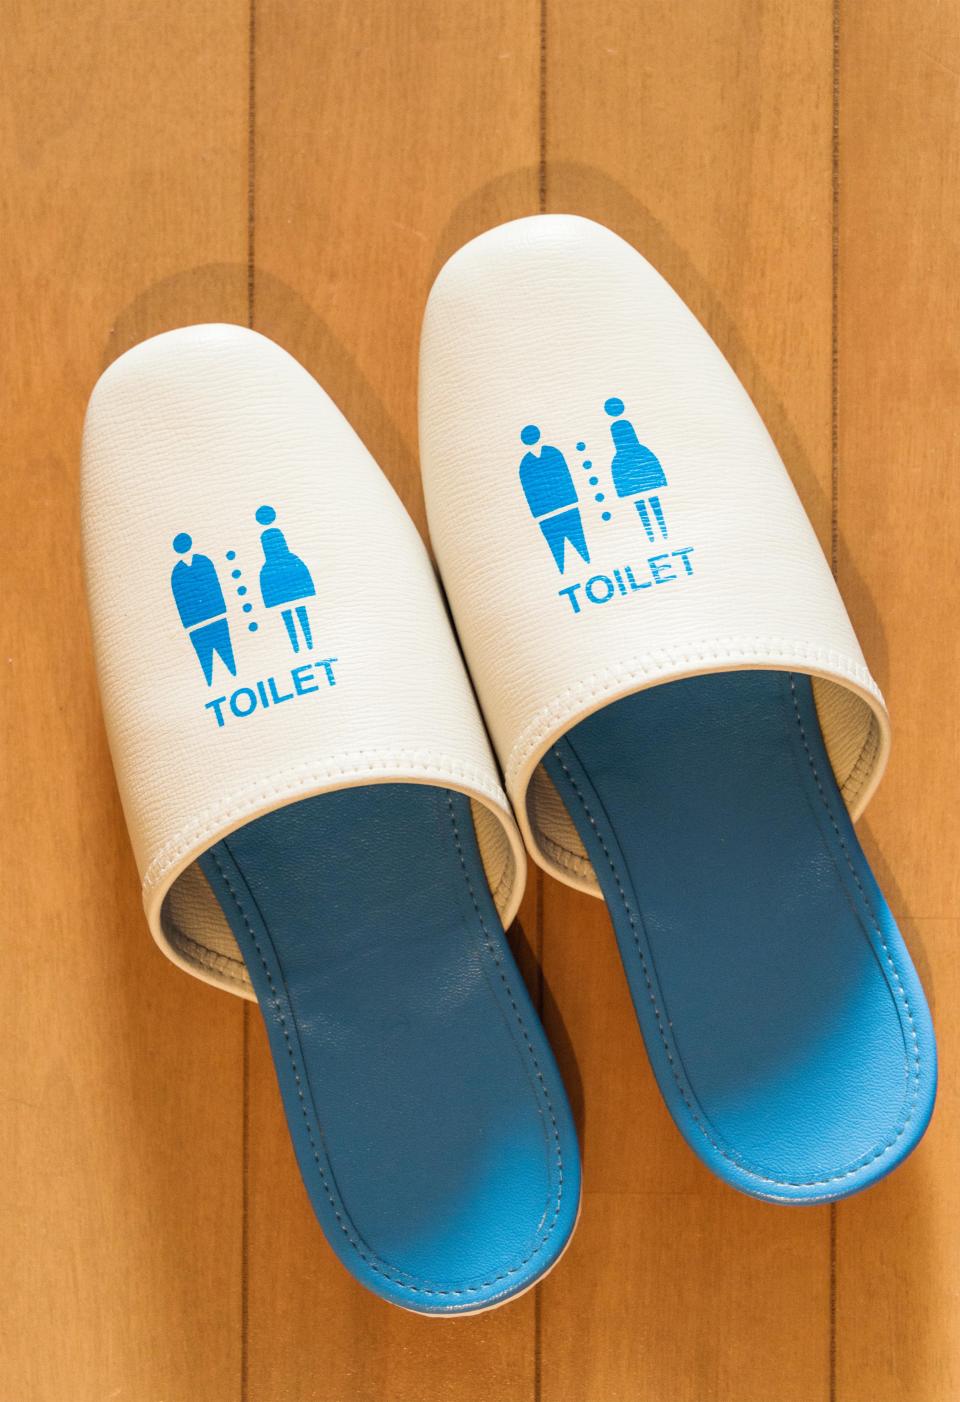 Don’t wear the loo slippers outside the loo